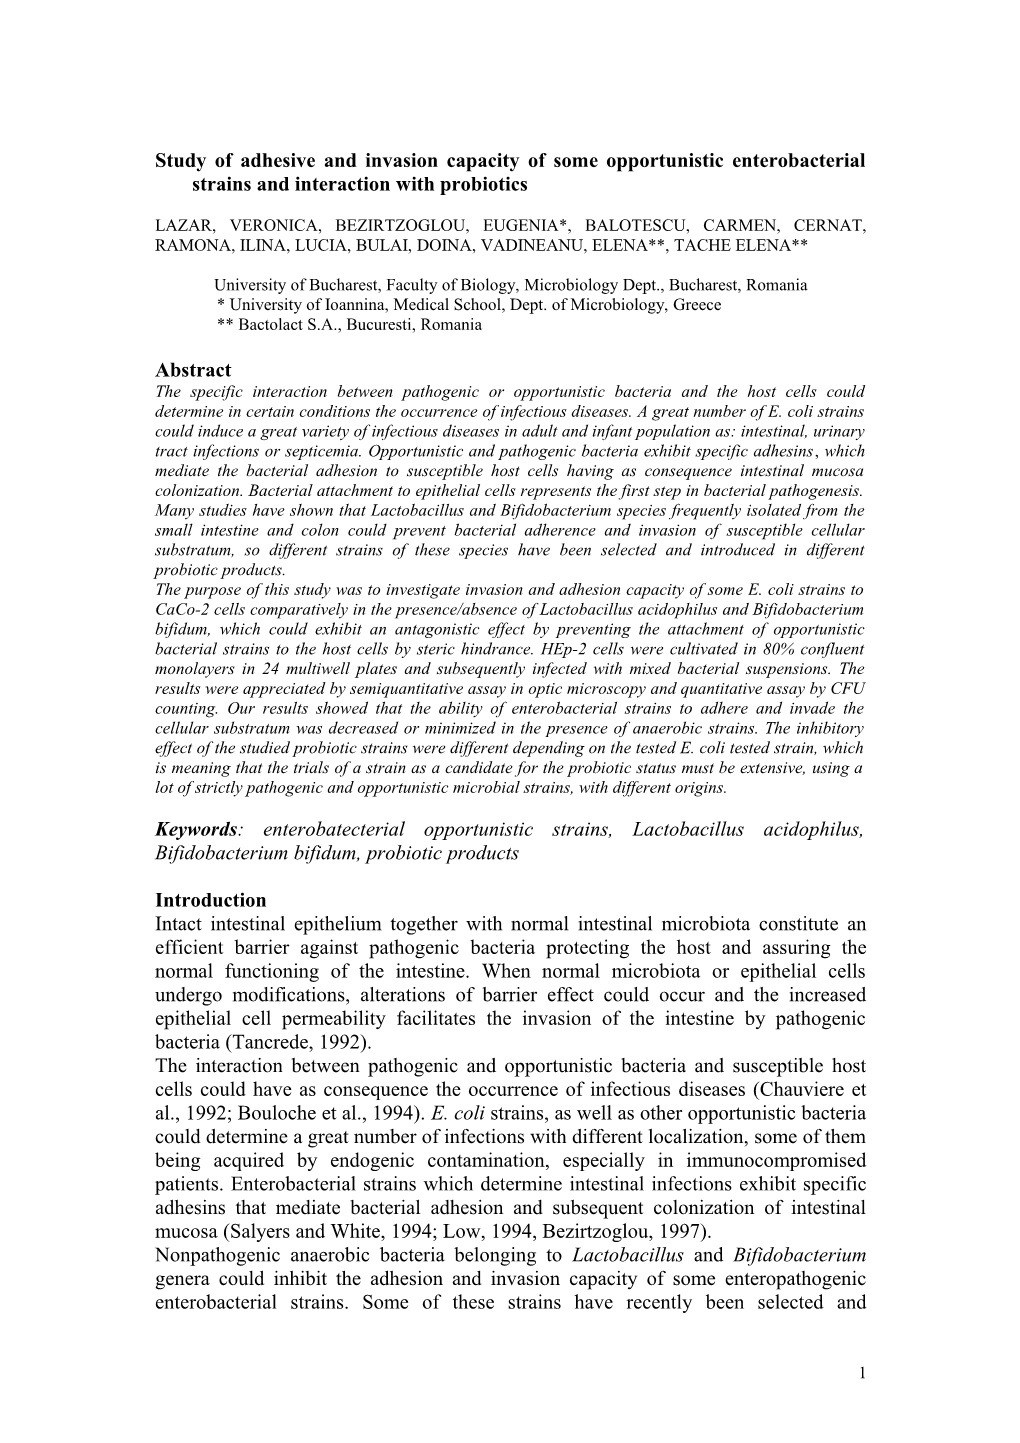 Study of Adhesive and Invasion Capacity of Some Opportunistic Enterobacterial Strains And